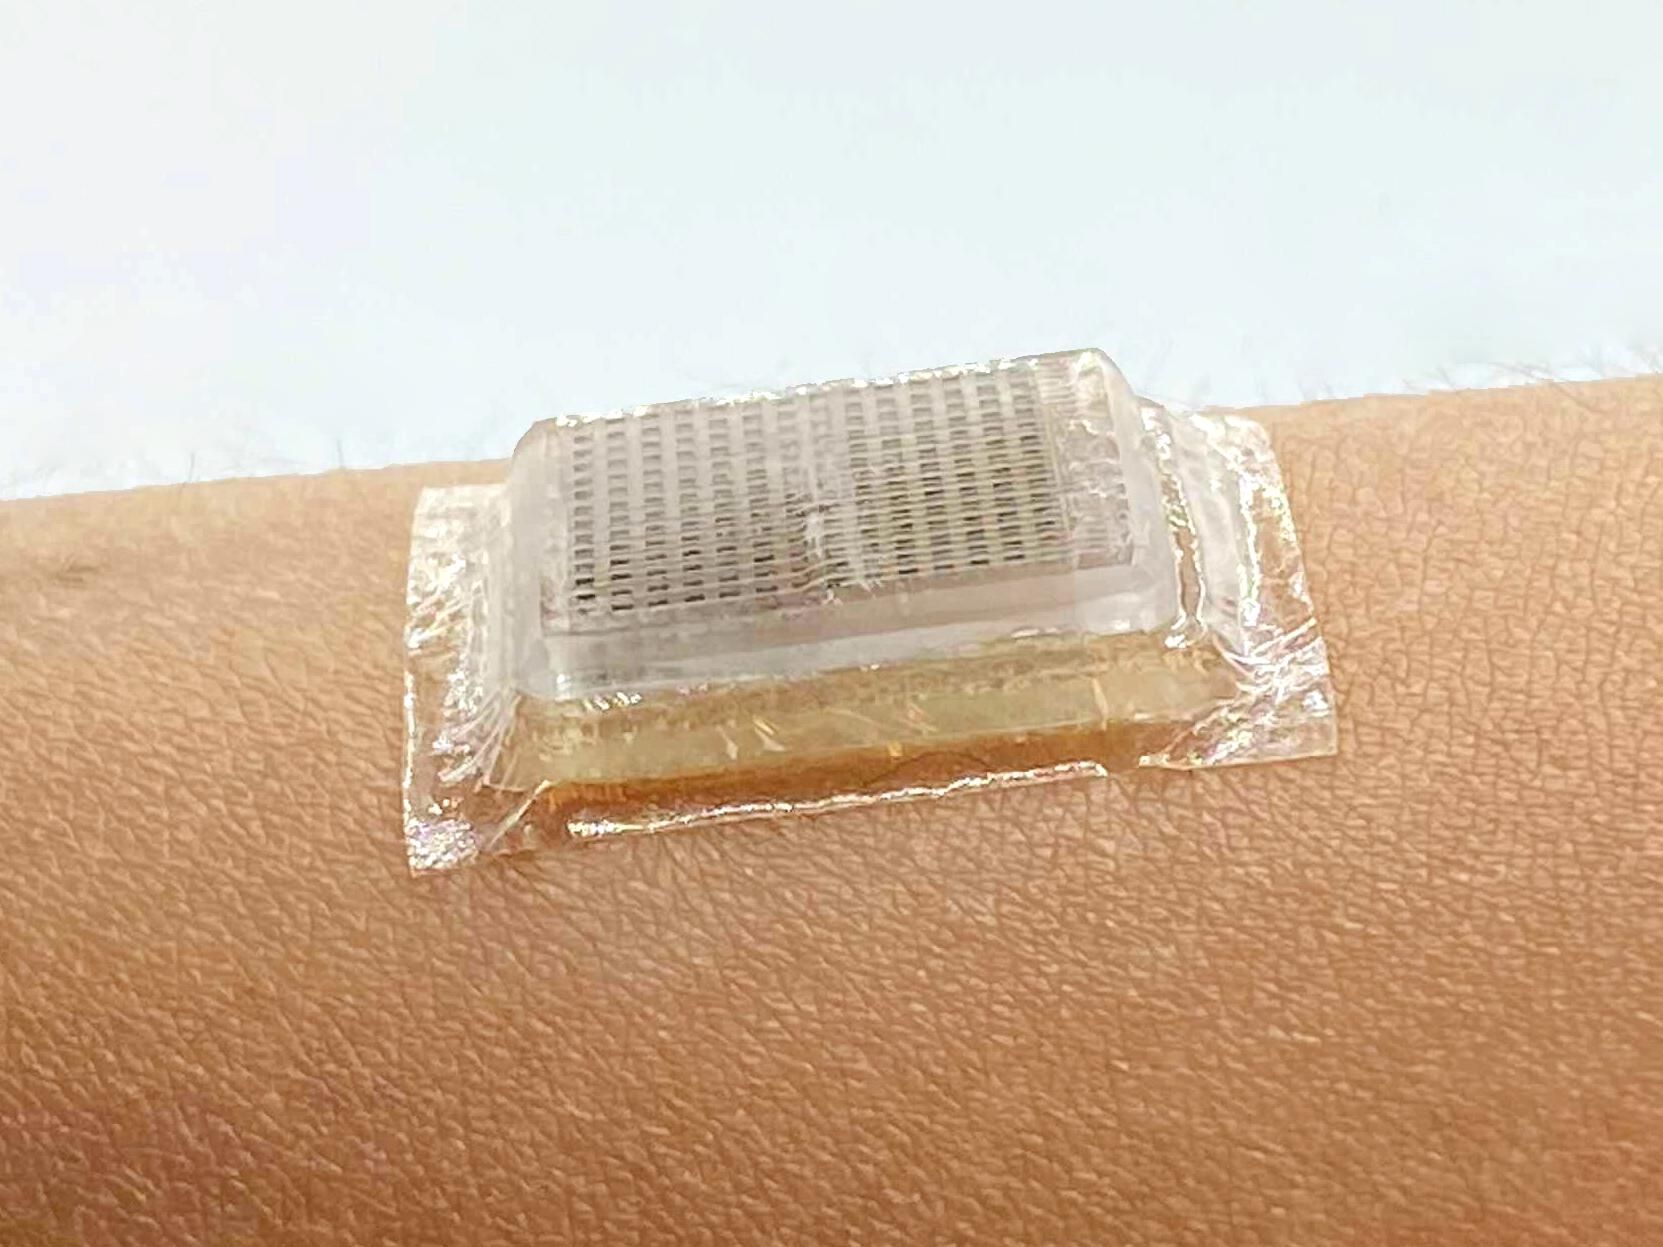 Close-up of a square rectangular clear device affixed to an arm.